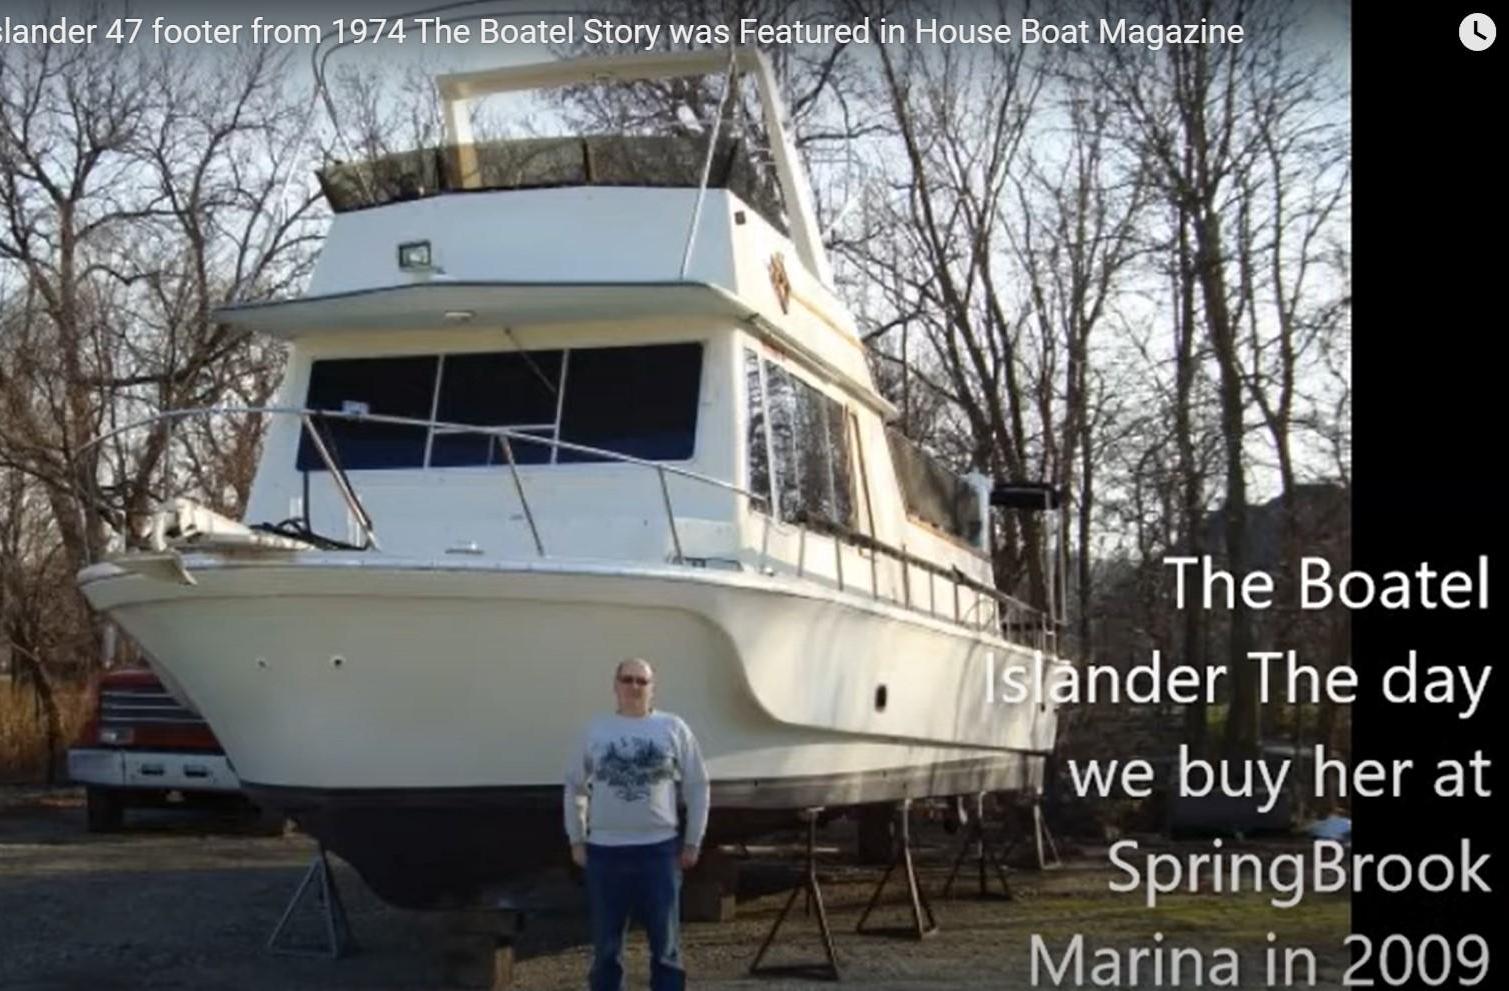 Restoring a Boatel Islander 47 Footer From 1974 the Boatel Story Was Featured in House Boat Magazine